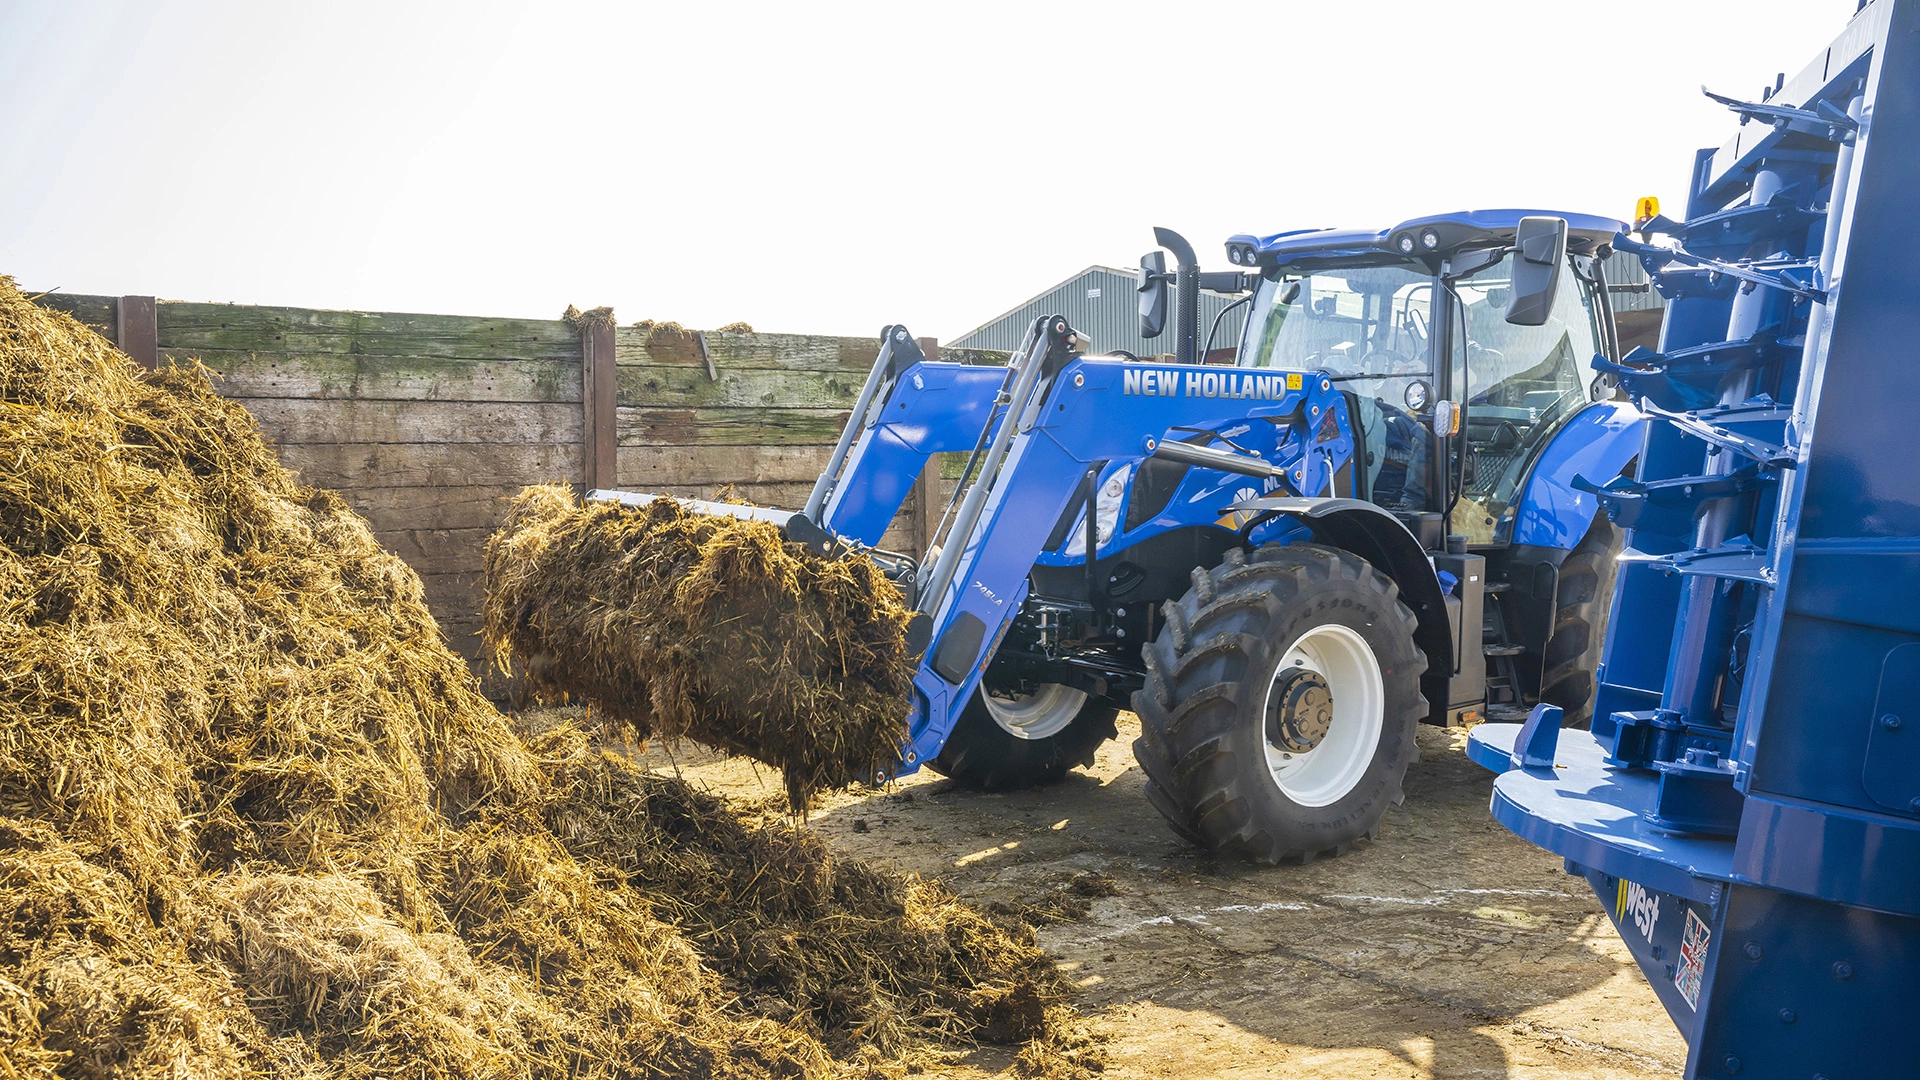 New Holland blue tractor with front loader lifting manure at a farm.